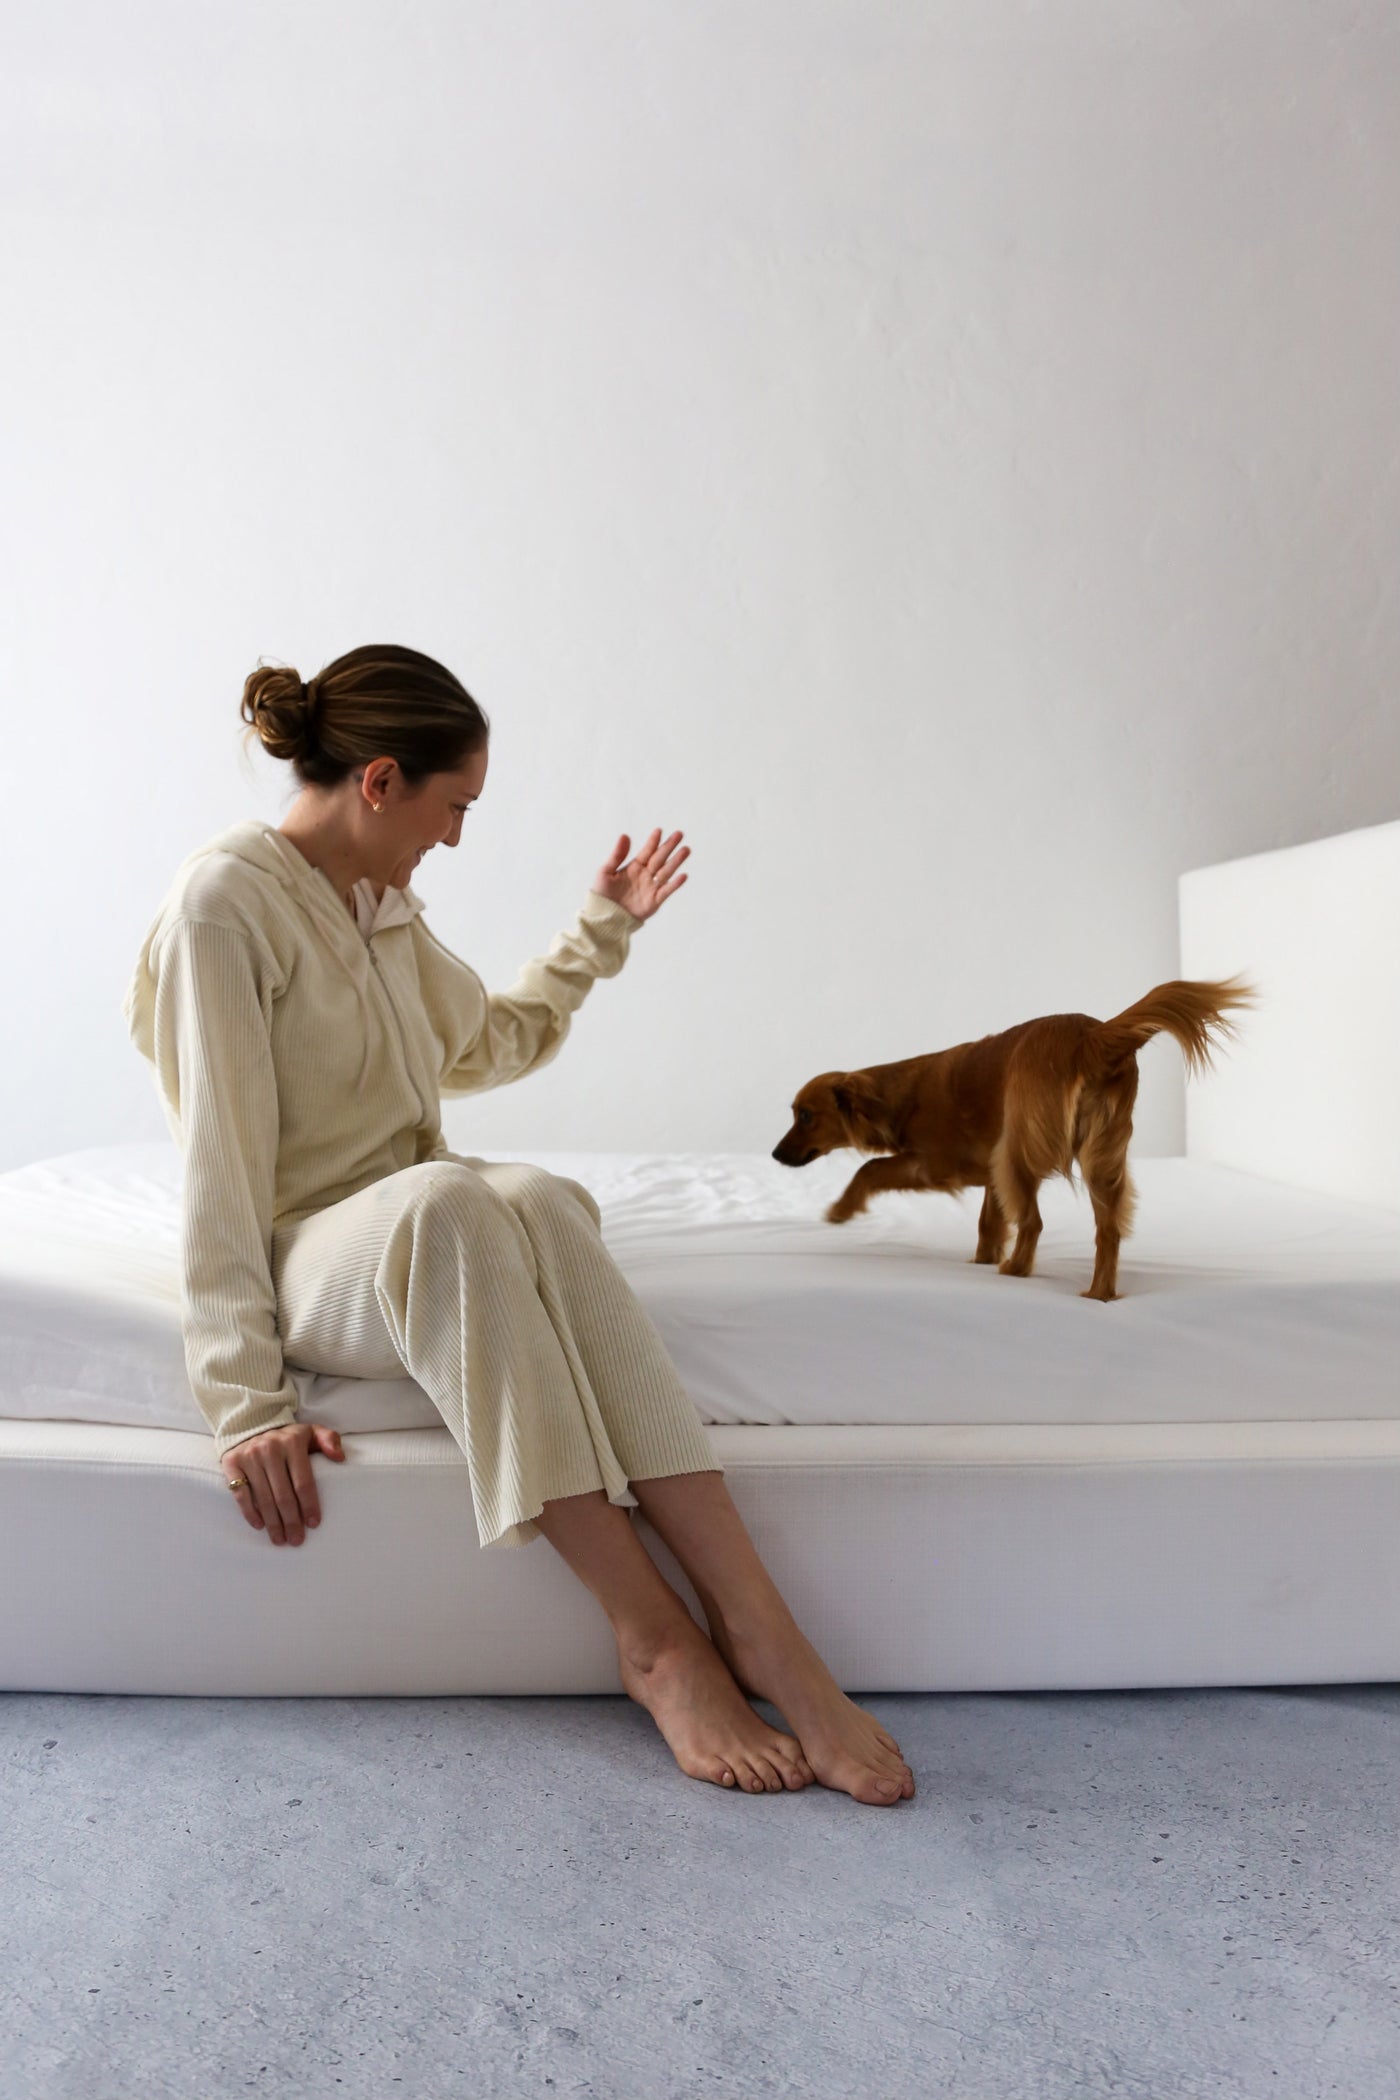 Woman Playing With Dog on a White Upholstered Bed Frame